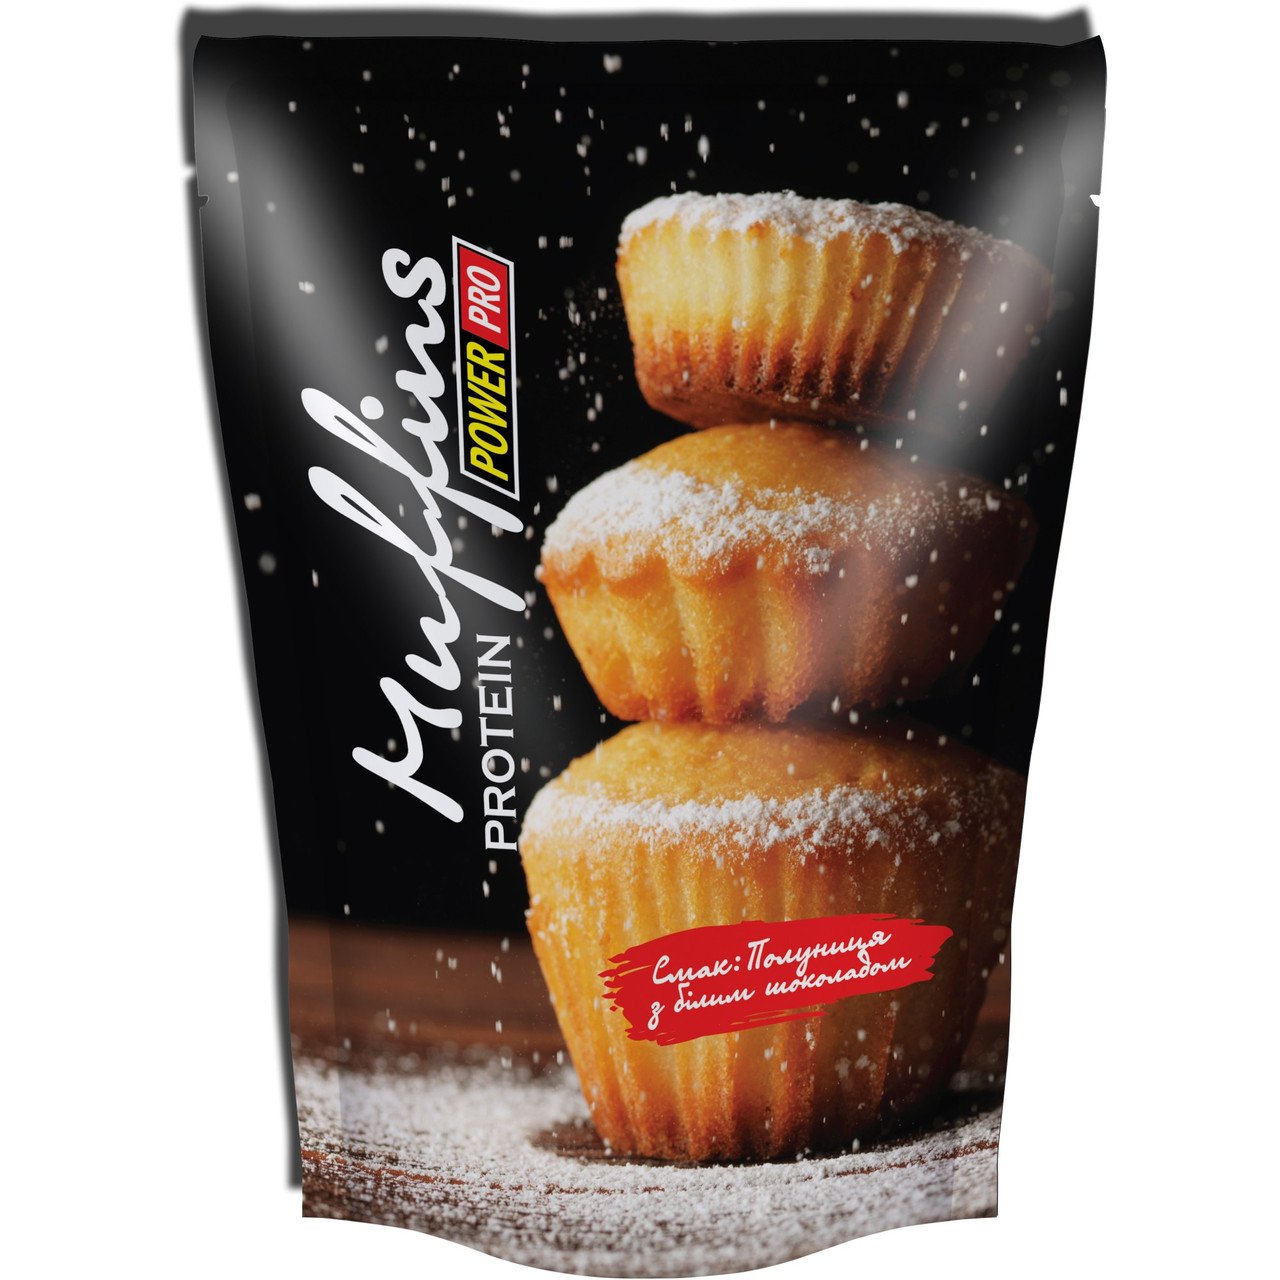 Muffins Protein Power Pro 600 g,  ml, Power Pro. Meal replacement. 